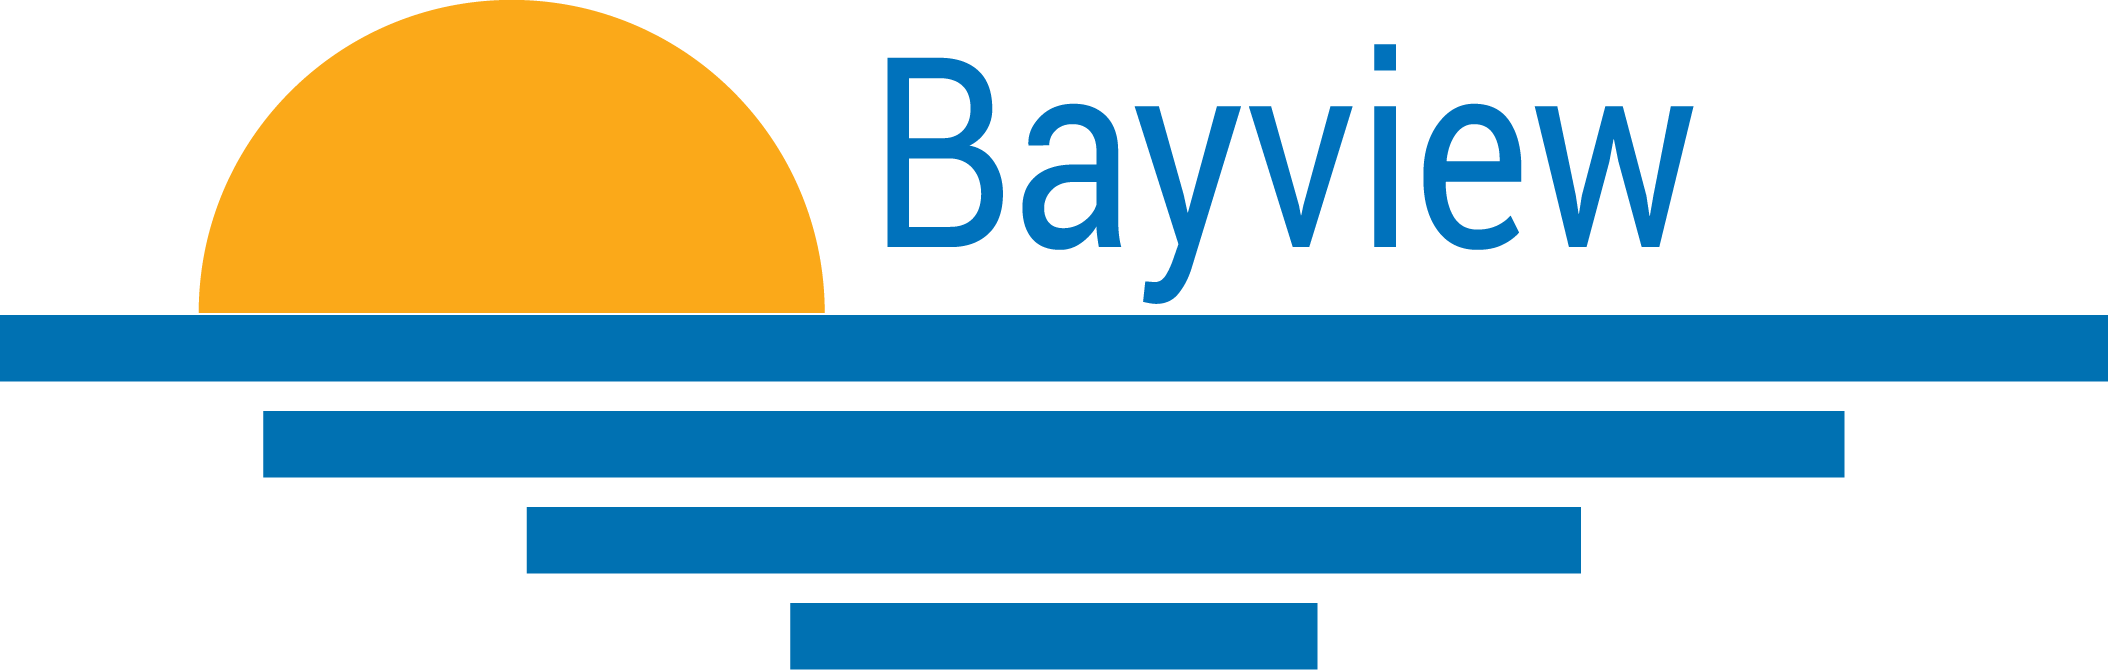 Bayview Property Management